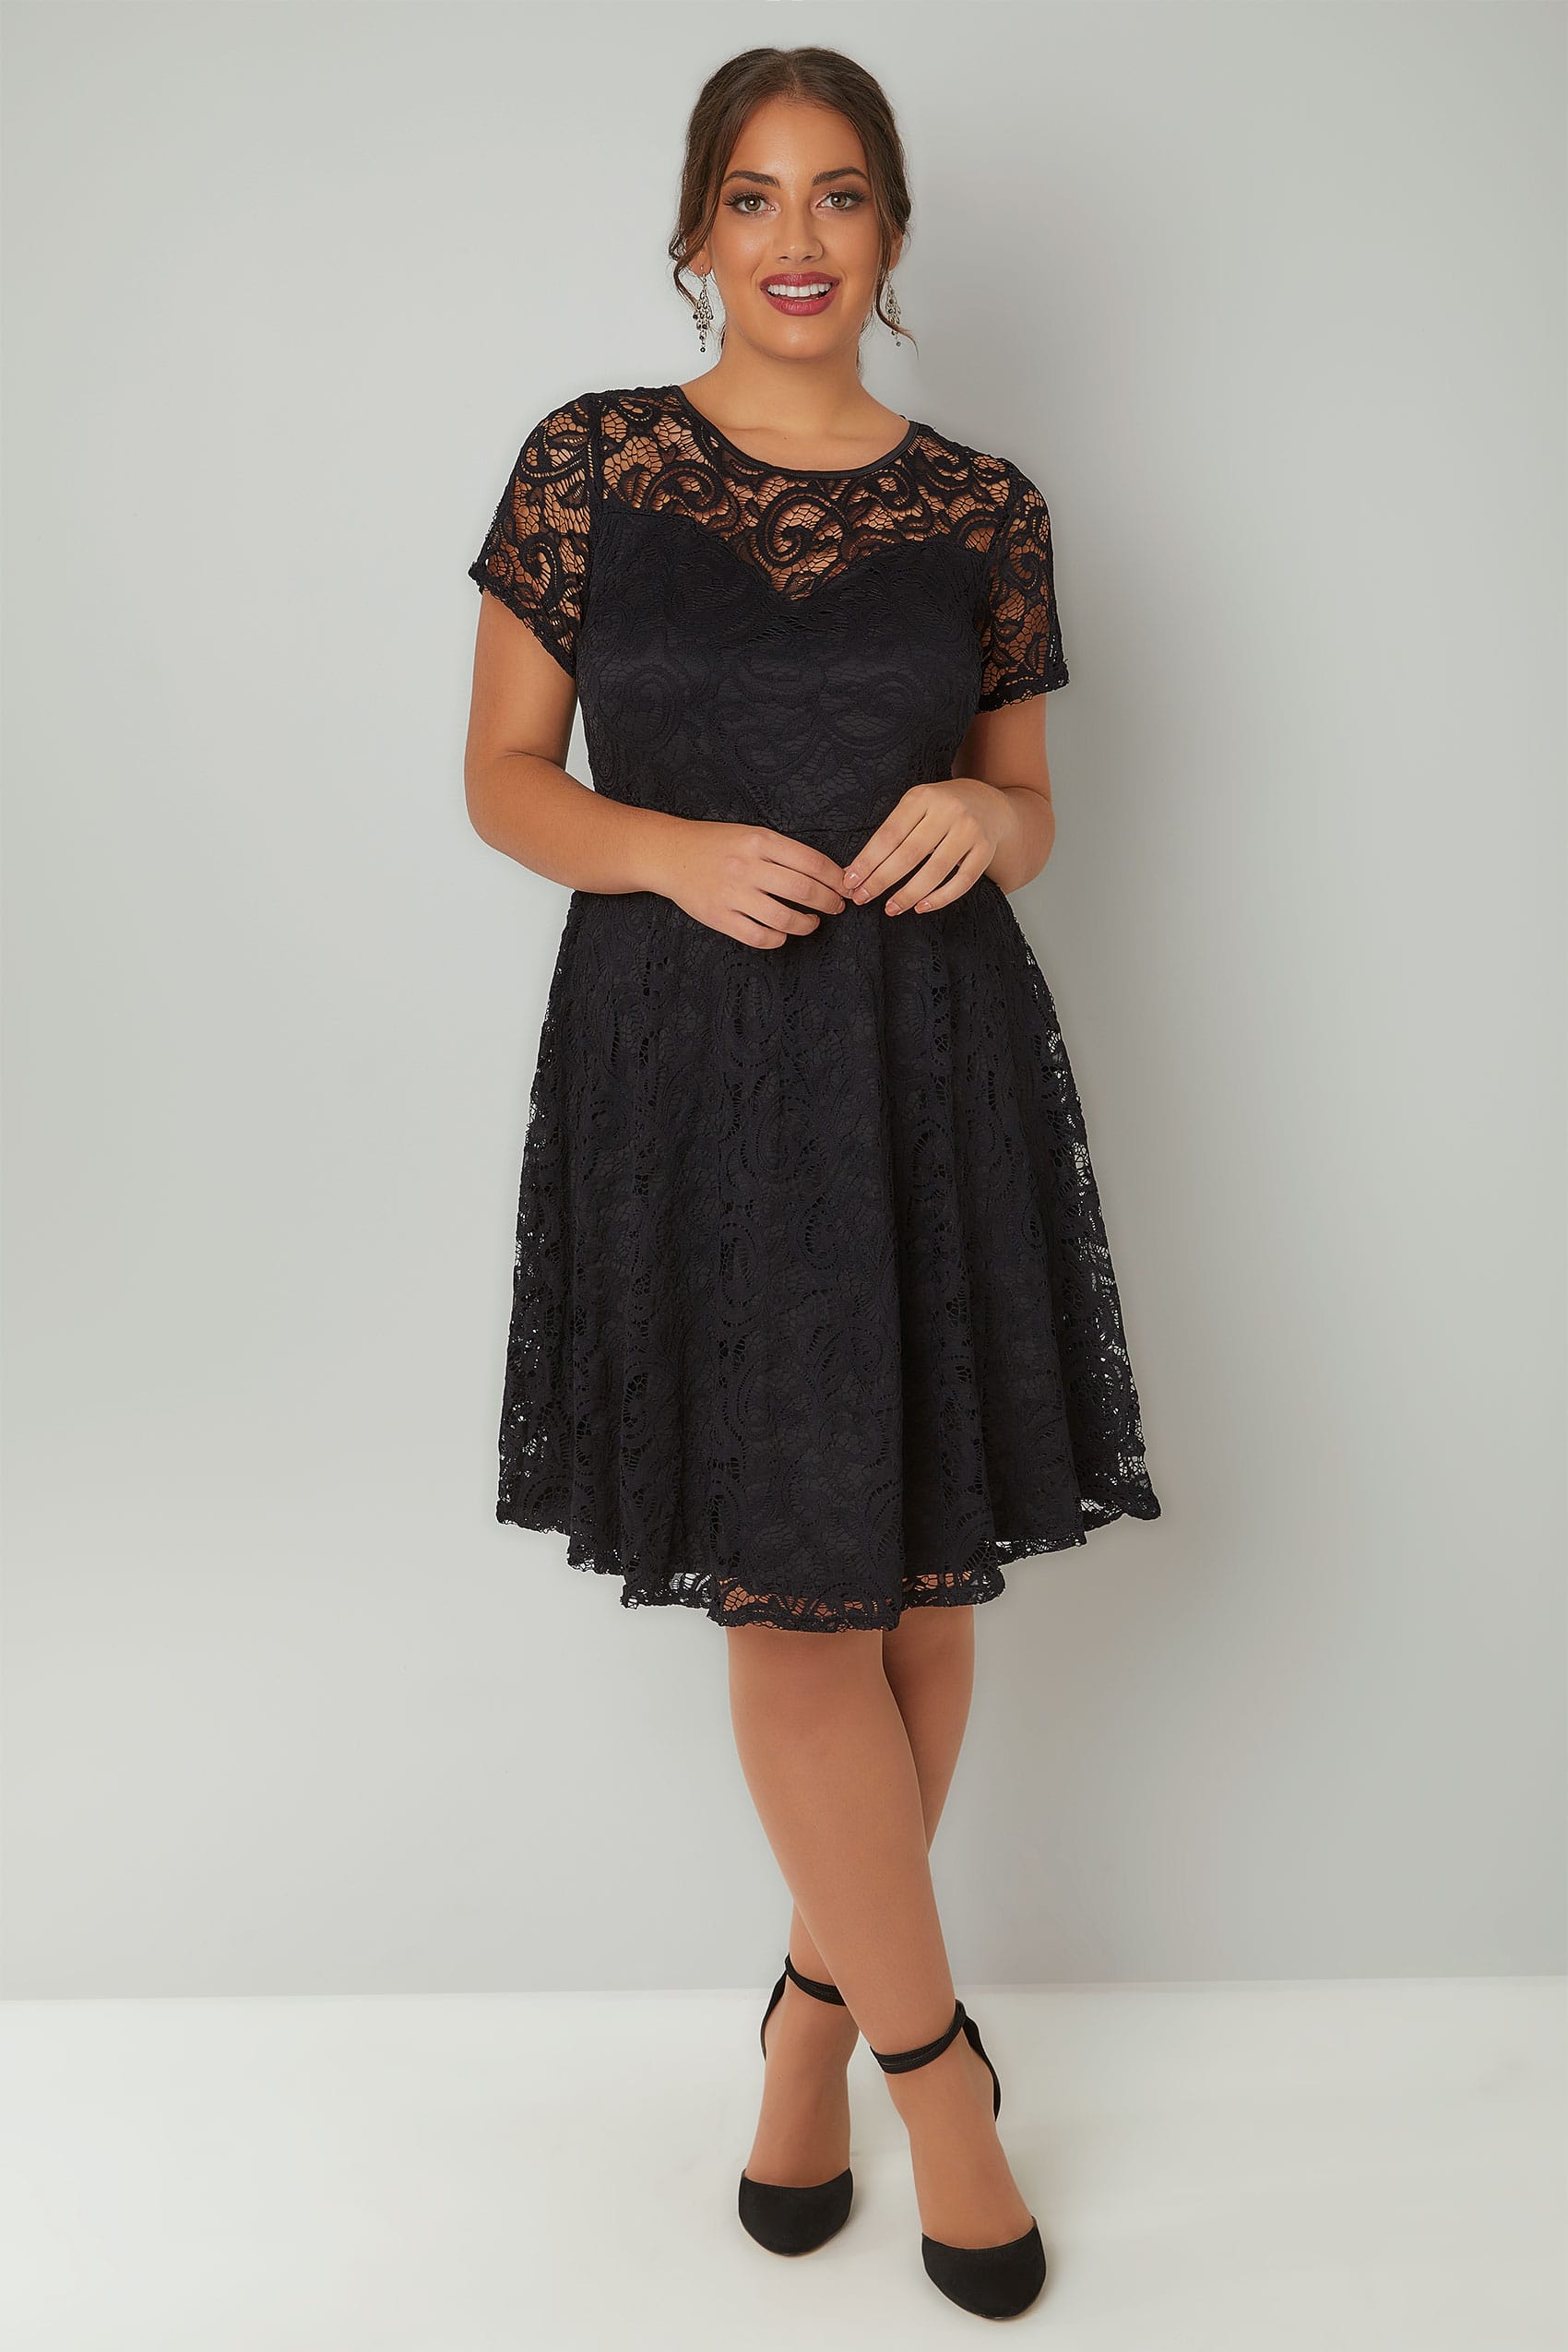 Black Lace Skater Dress With Sweetheart Bust, Plus size 16 to 36